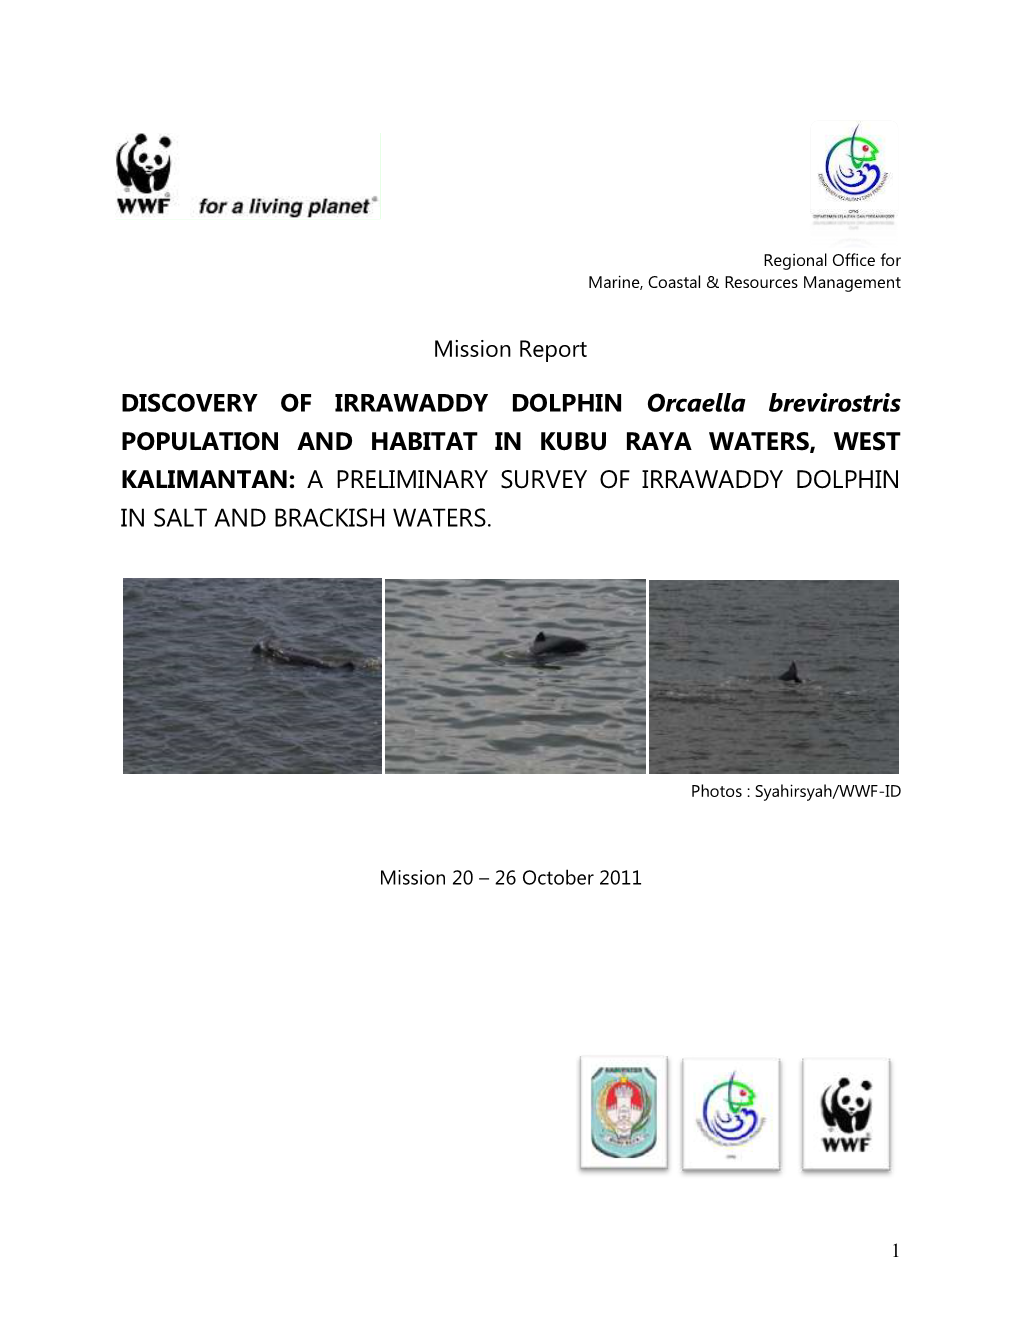 DISCOVERY of IRRAWADDY DOLPHIN Orcaella Brevirostris